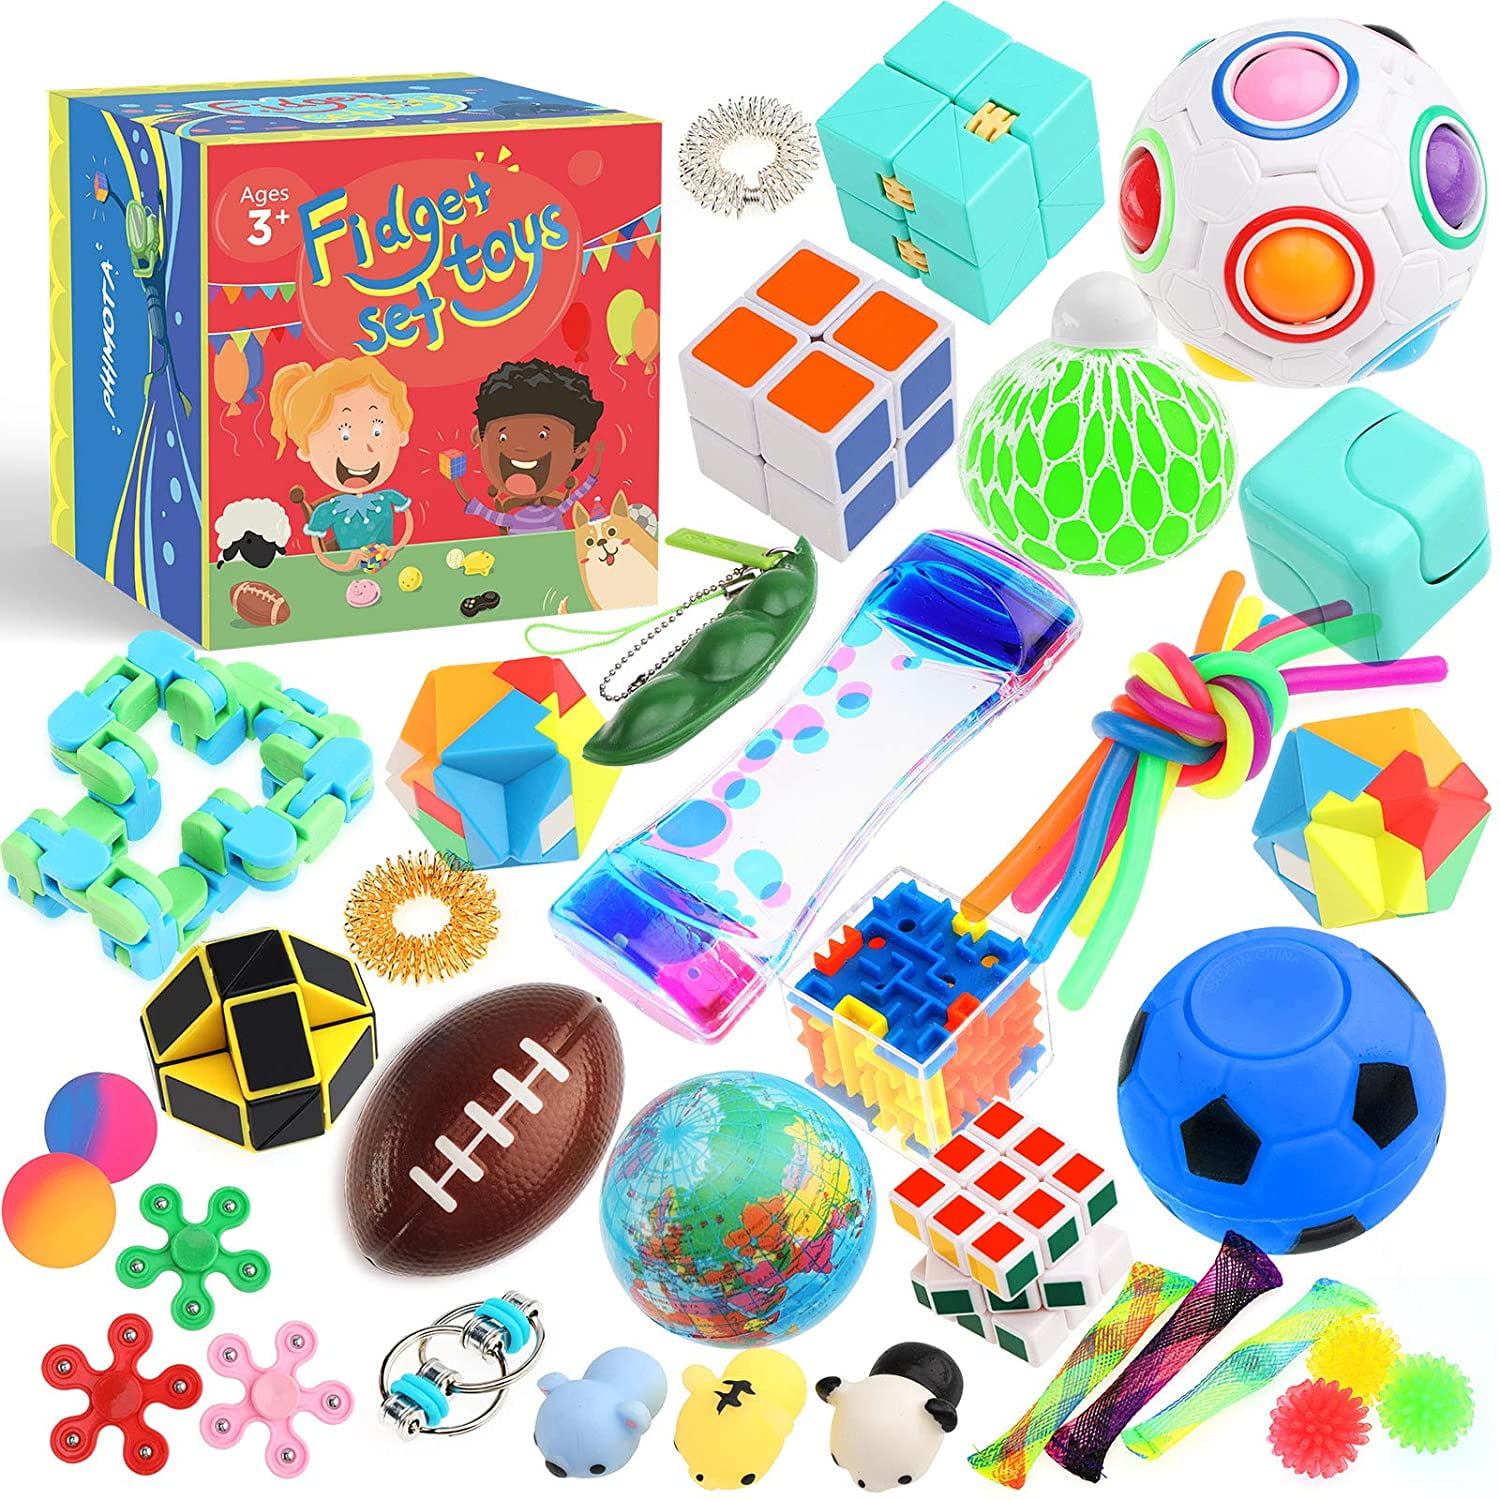 Details about   Fidget Sensory Toys Set Stress Relief Toys For Autism Anxiety for Children US 